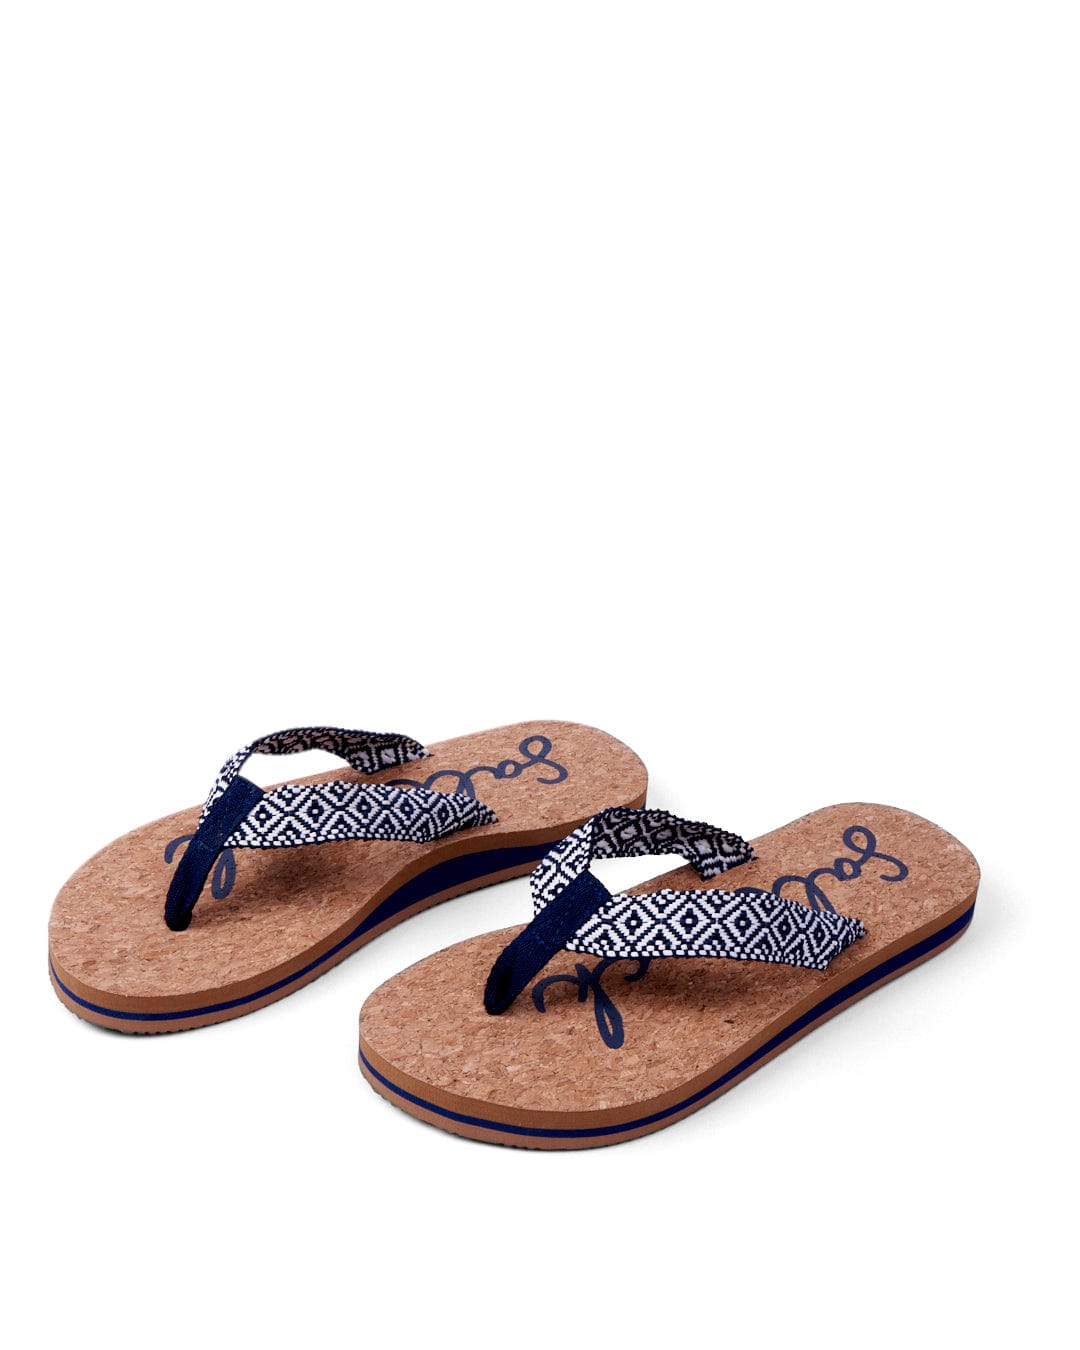 A pair of Corklife flip-flops with navy webbing toe straps on a white background. (Saltrock)